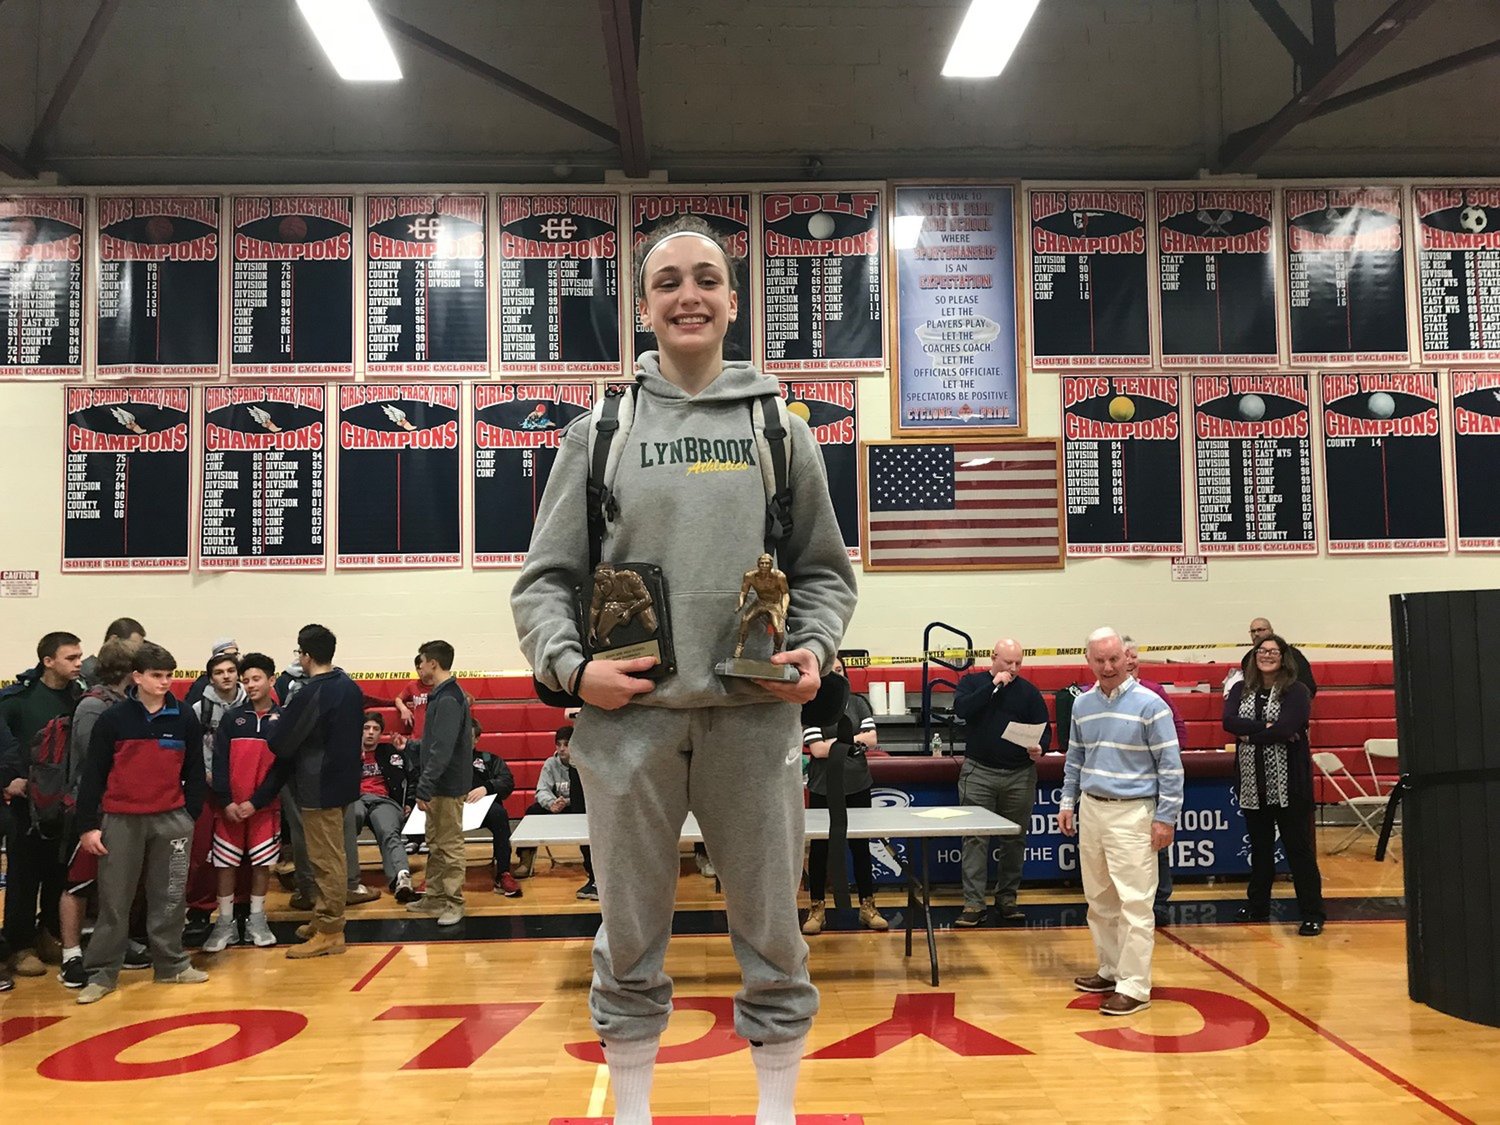 Former Lynbrook High School wrestler Ally Fitzgerald committed to join the new women’s team at Sacred Heat University in Connecticut. She made history as a freshman at LHS in 2018, when she became the first female to win in her weight class at a boys’ wrestling tournament in Nassau County.